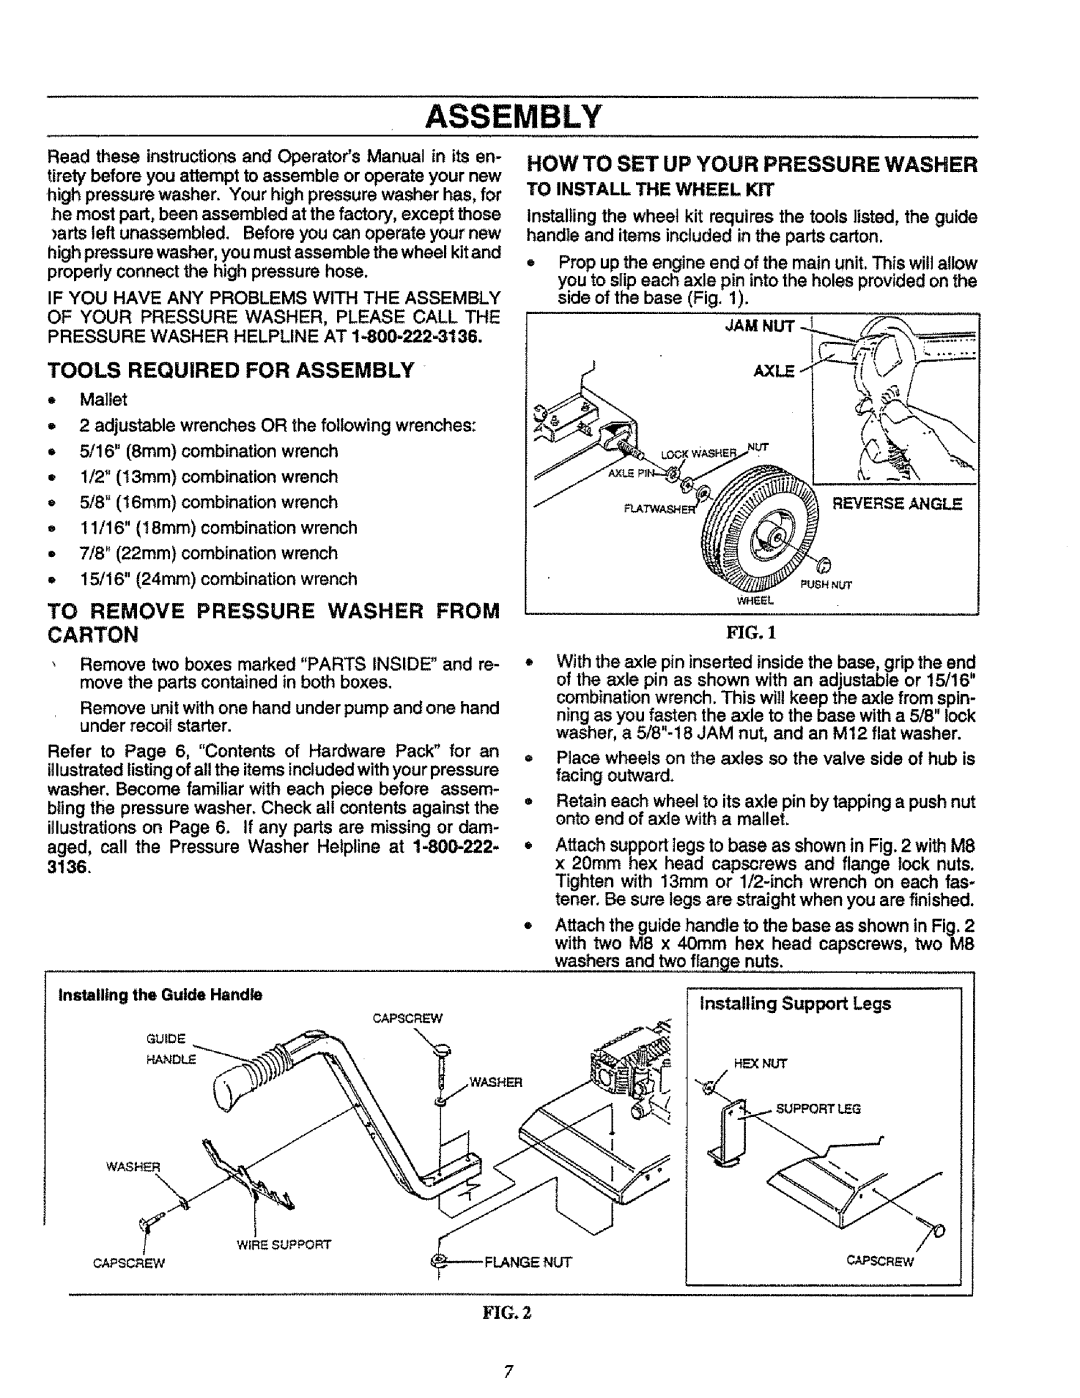 Craftsman 580.751651 owner manual Tools Required For Assembly, To Remove Pressure Washer From Carton 